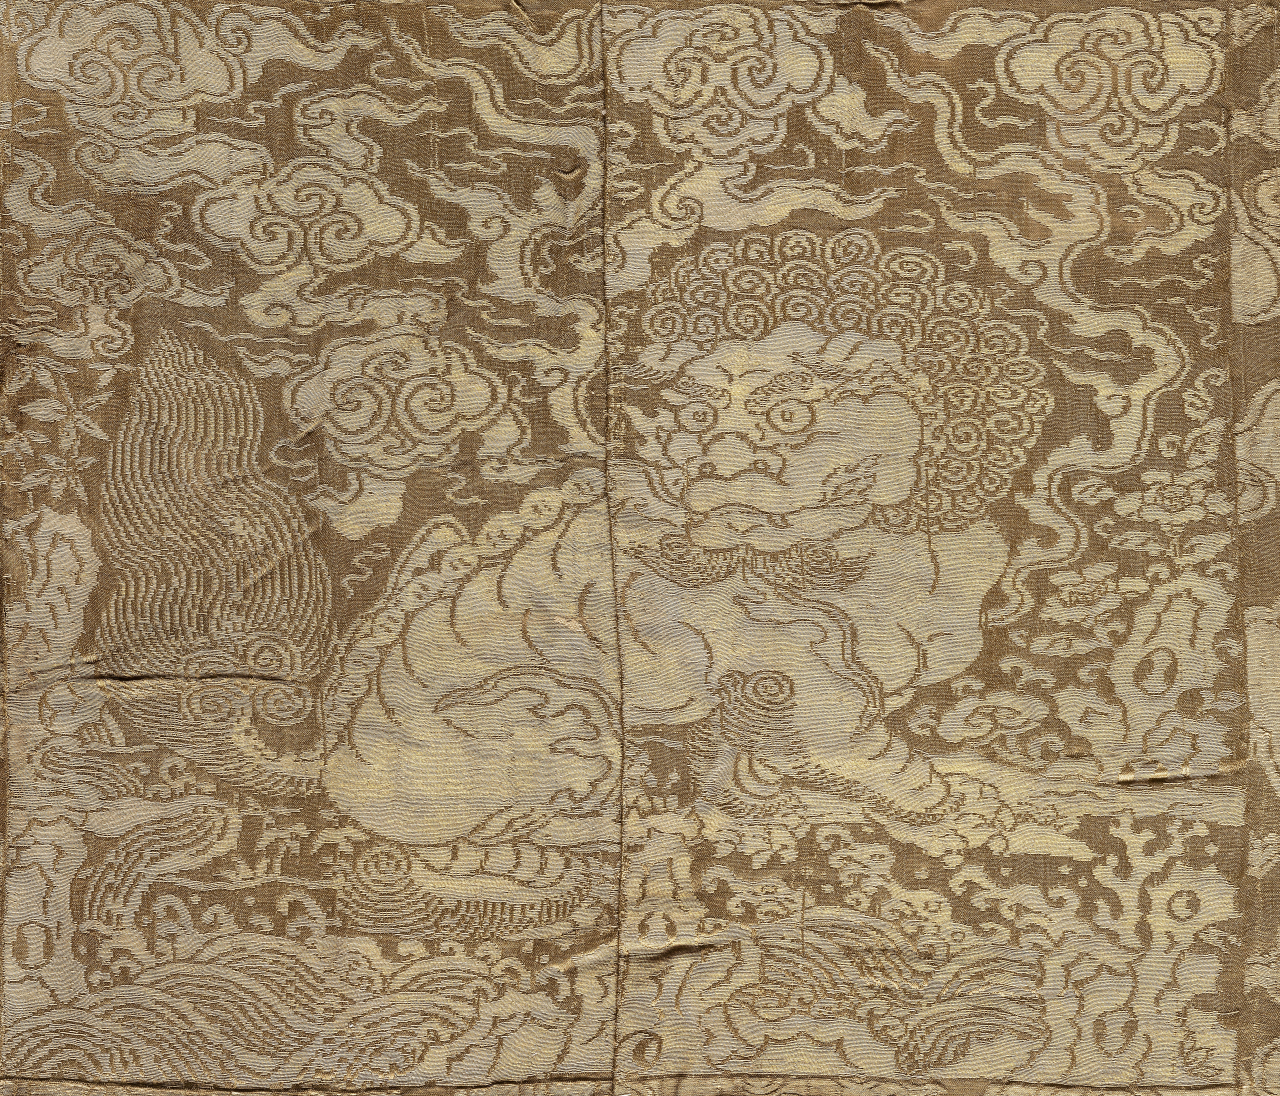 A close-up image of lion embroidery on a 16th-century skirt found in a tomb in Namyangju, Gyeonggi Province (CHA)